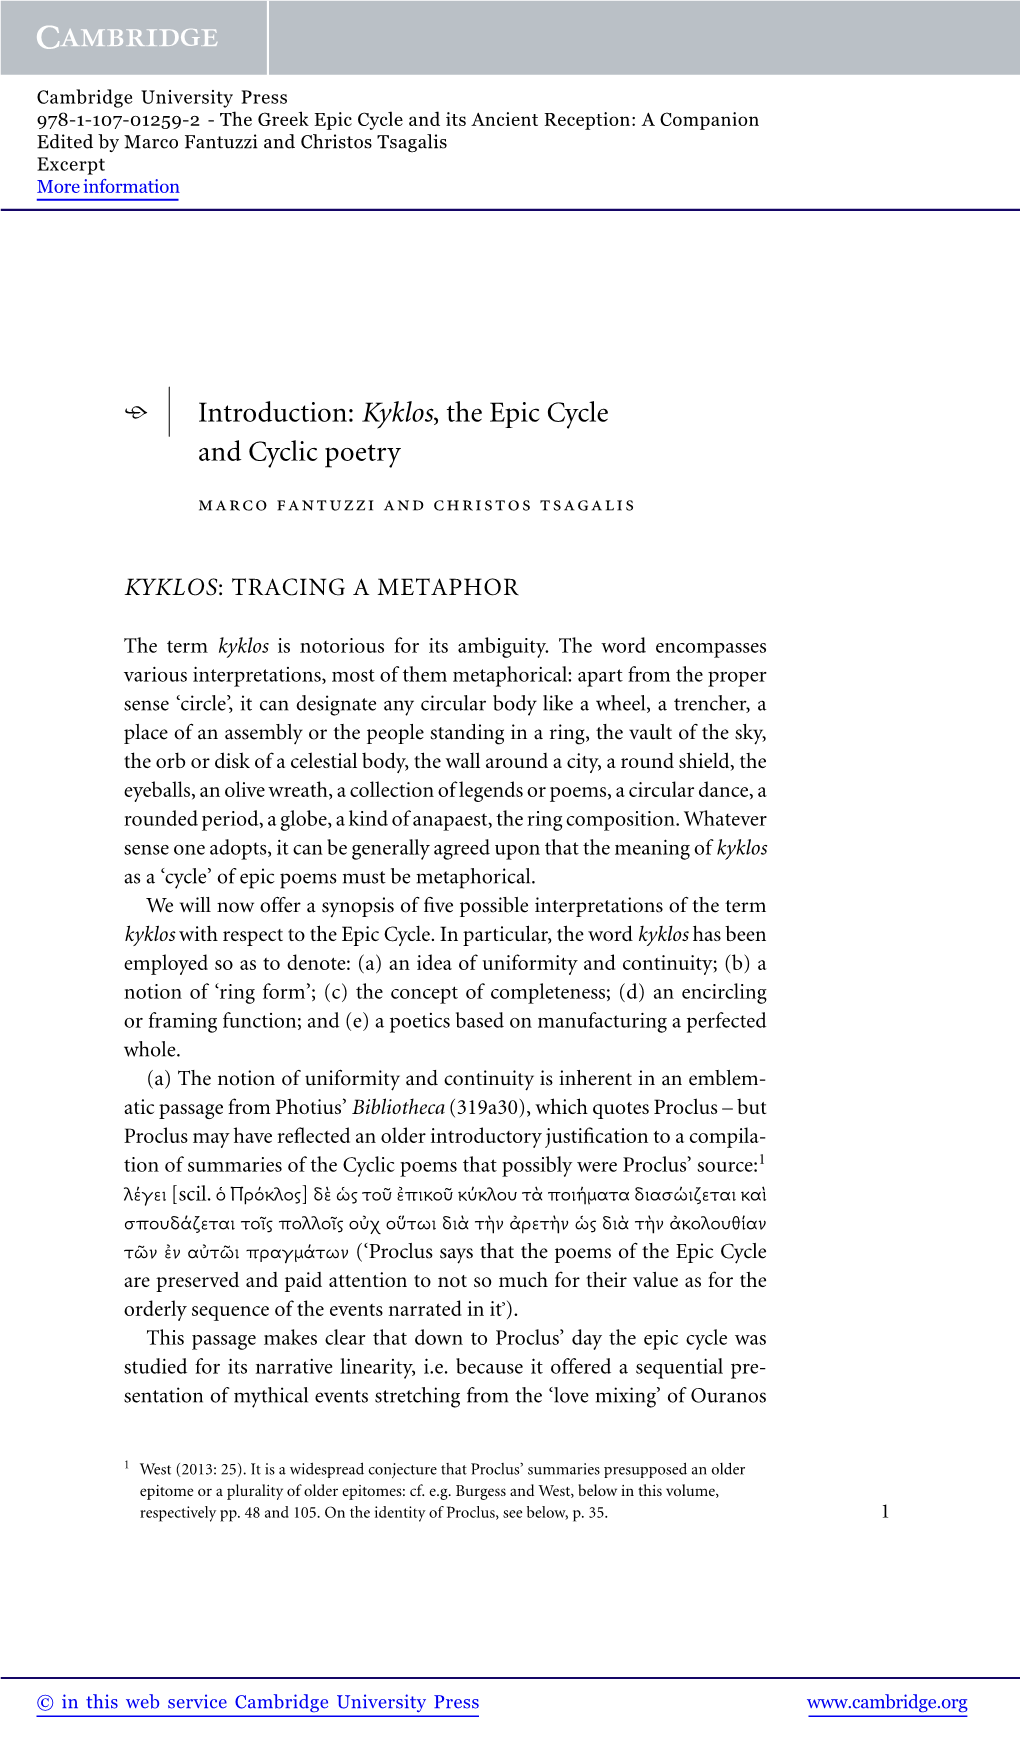 Kyklos, the Epic Cycle and Cyclic Poetry